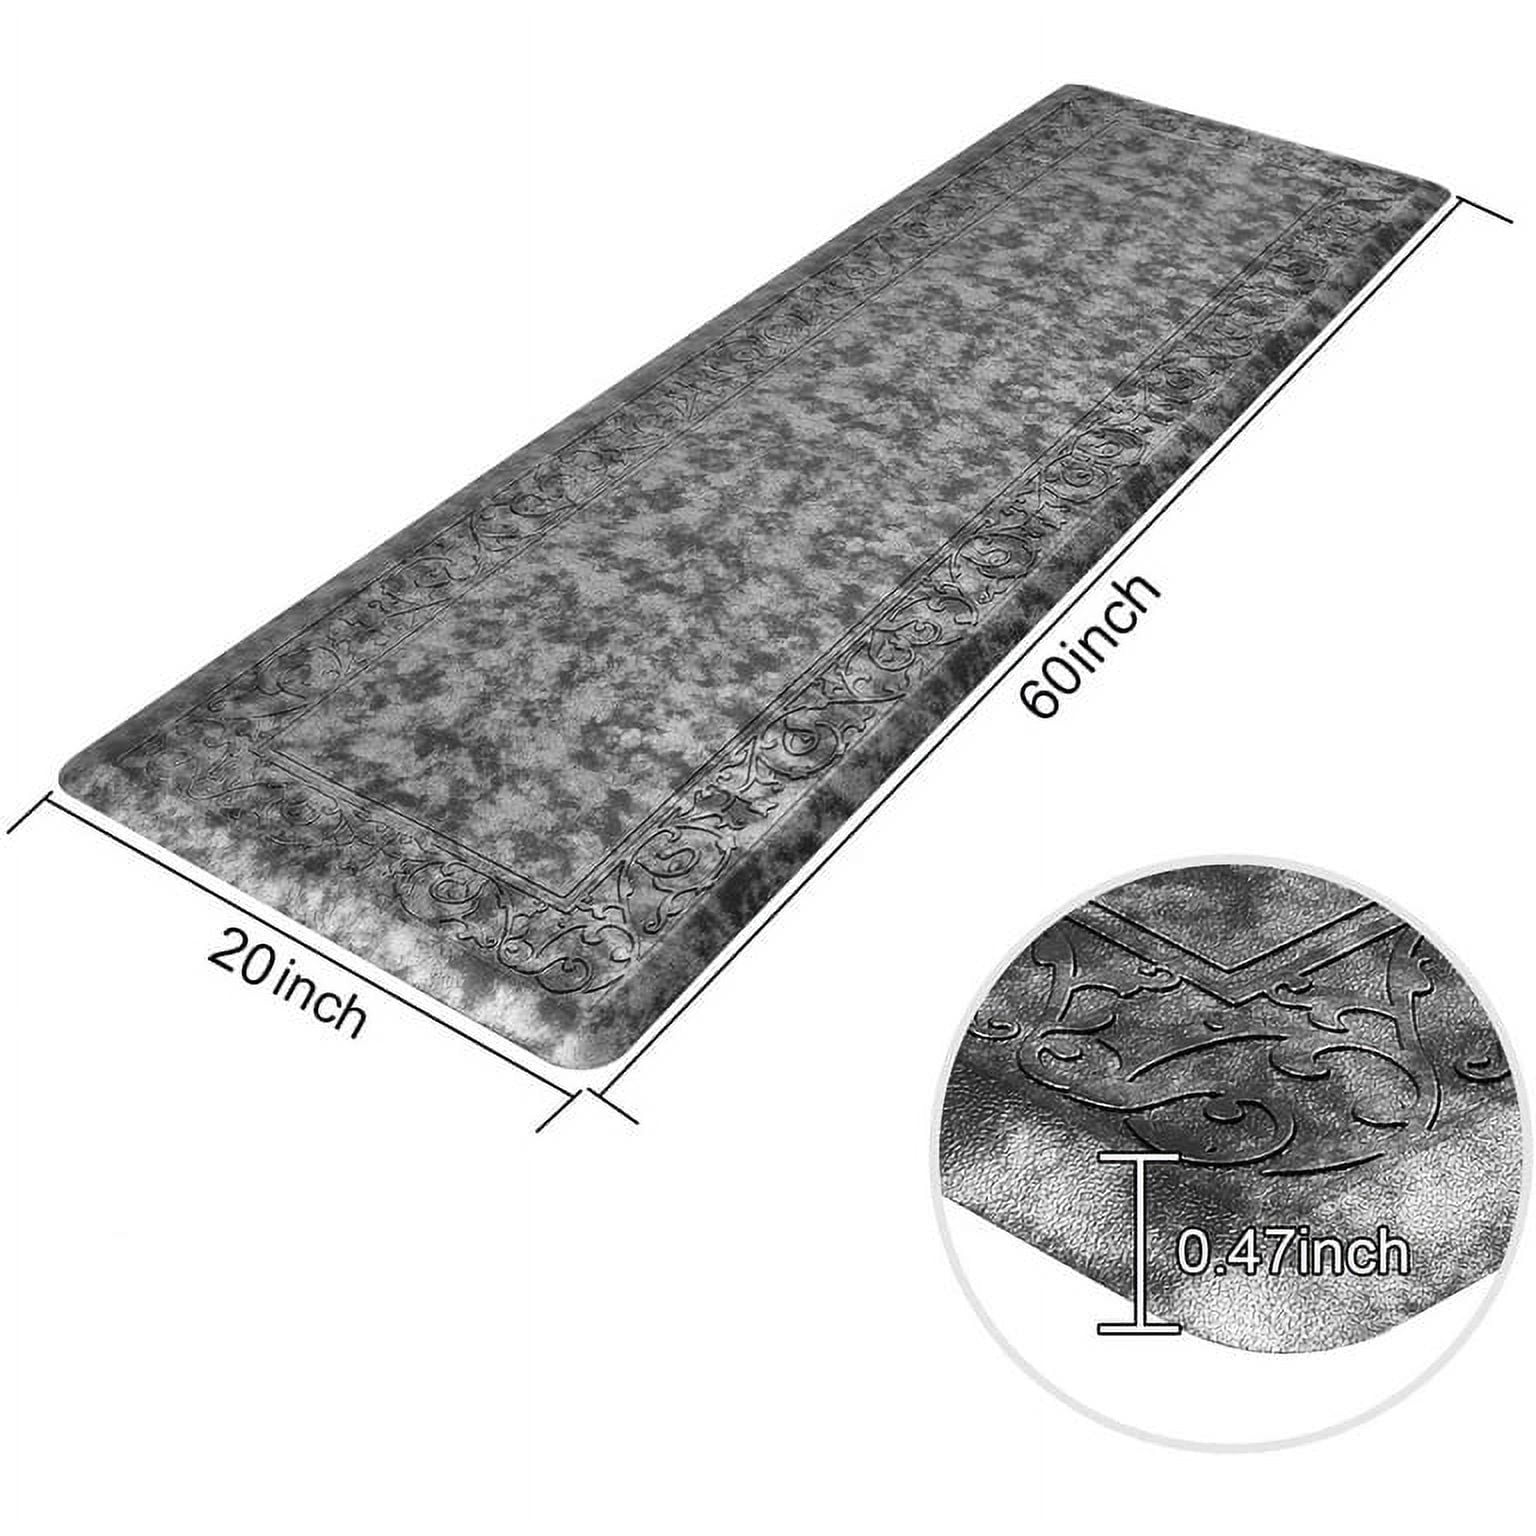 MELAJIA Kitchen Mats Cushioned Anti Fatigue 2 Piece Set Comfort Floor –  Discounted-Rugs